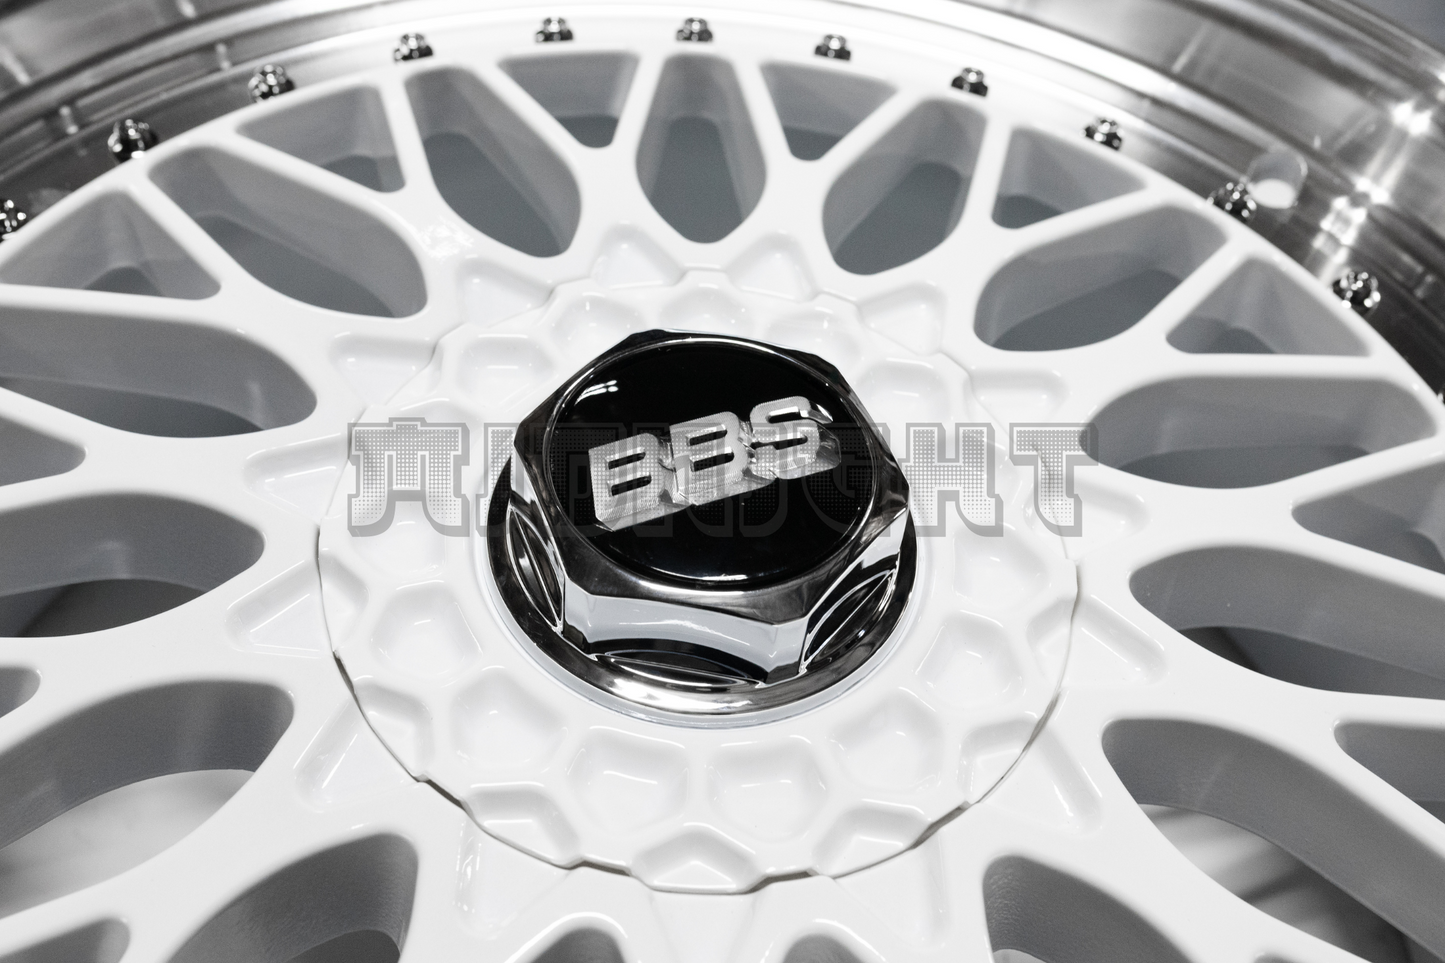 BBS RS Style Double Step Lip 20" 8.5J +35 (5X120)